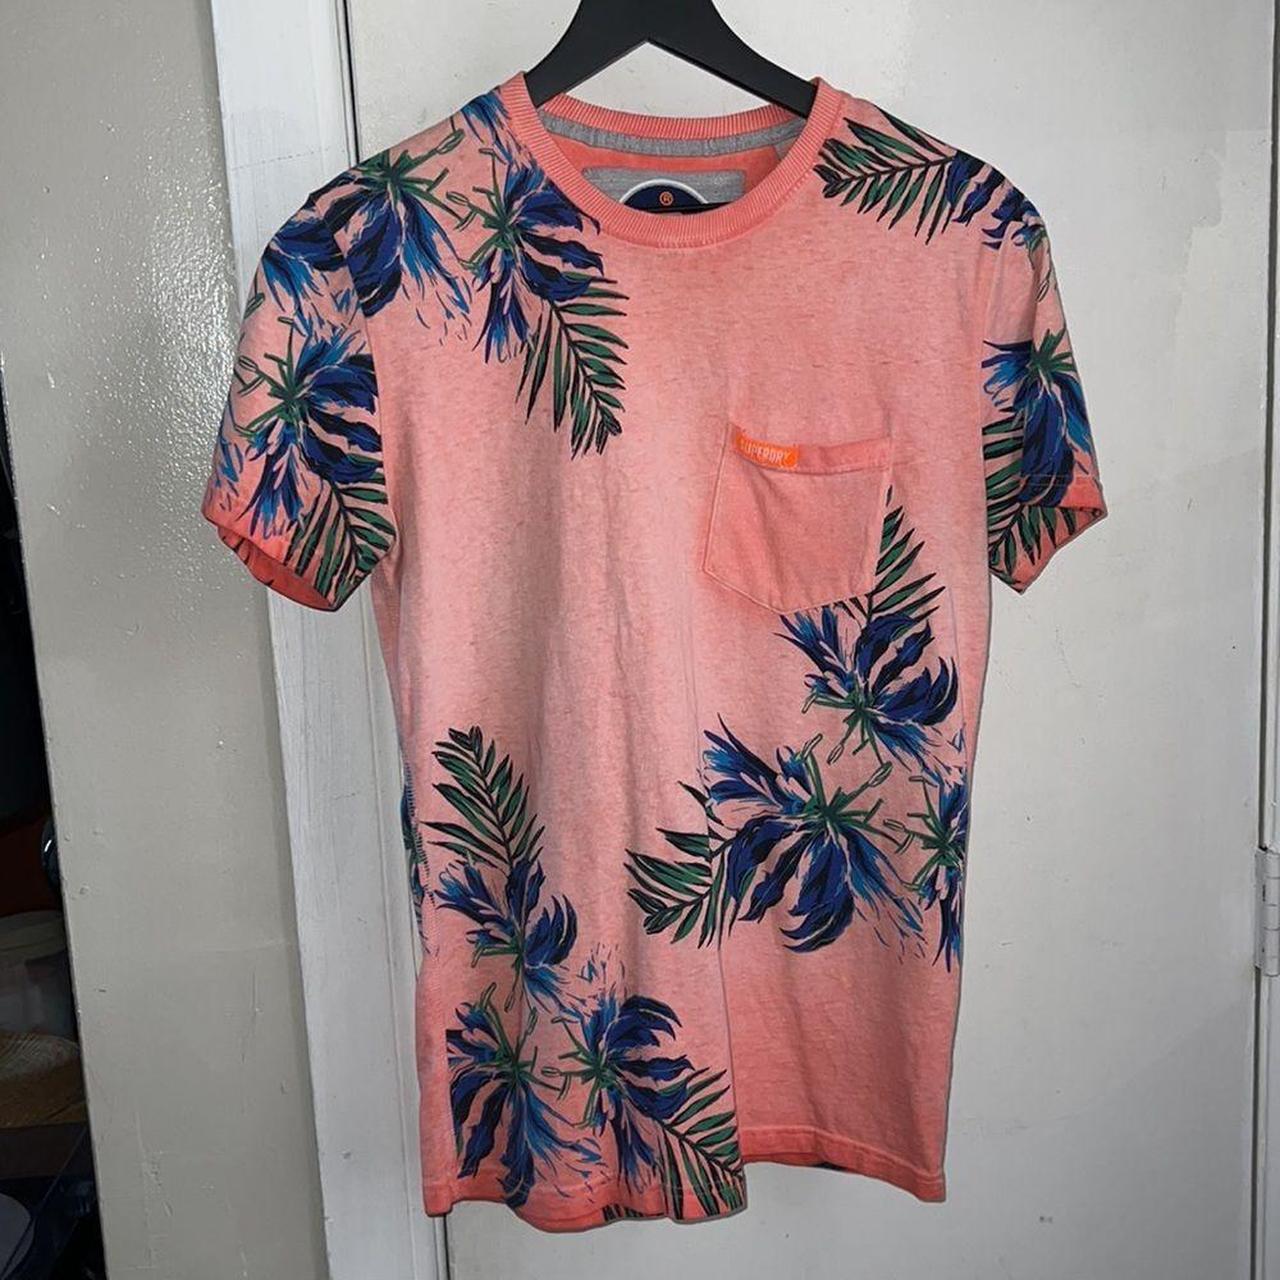 Superdry Men's Pink and Blue T-shirt (2)